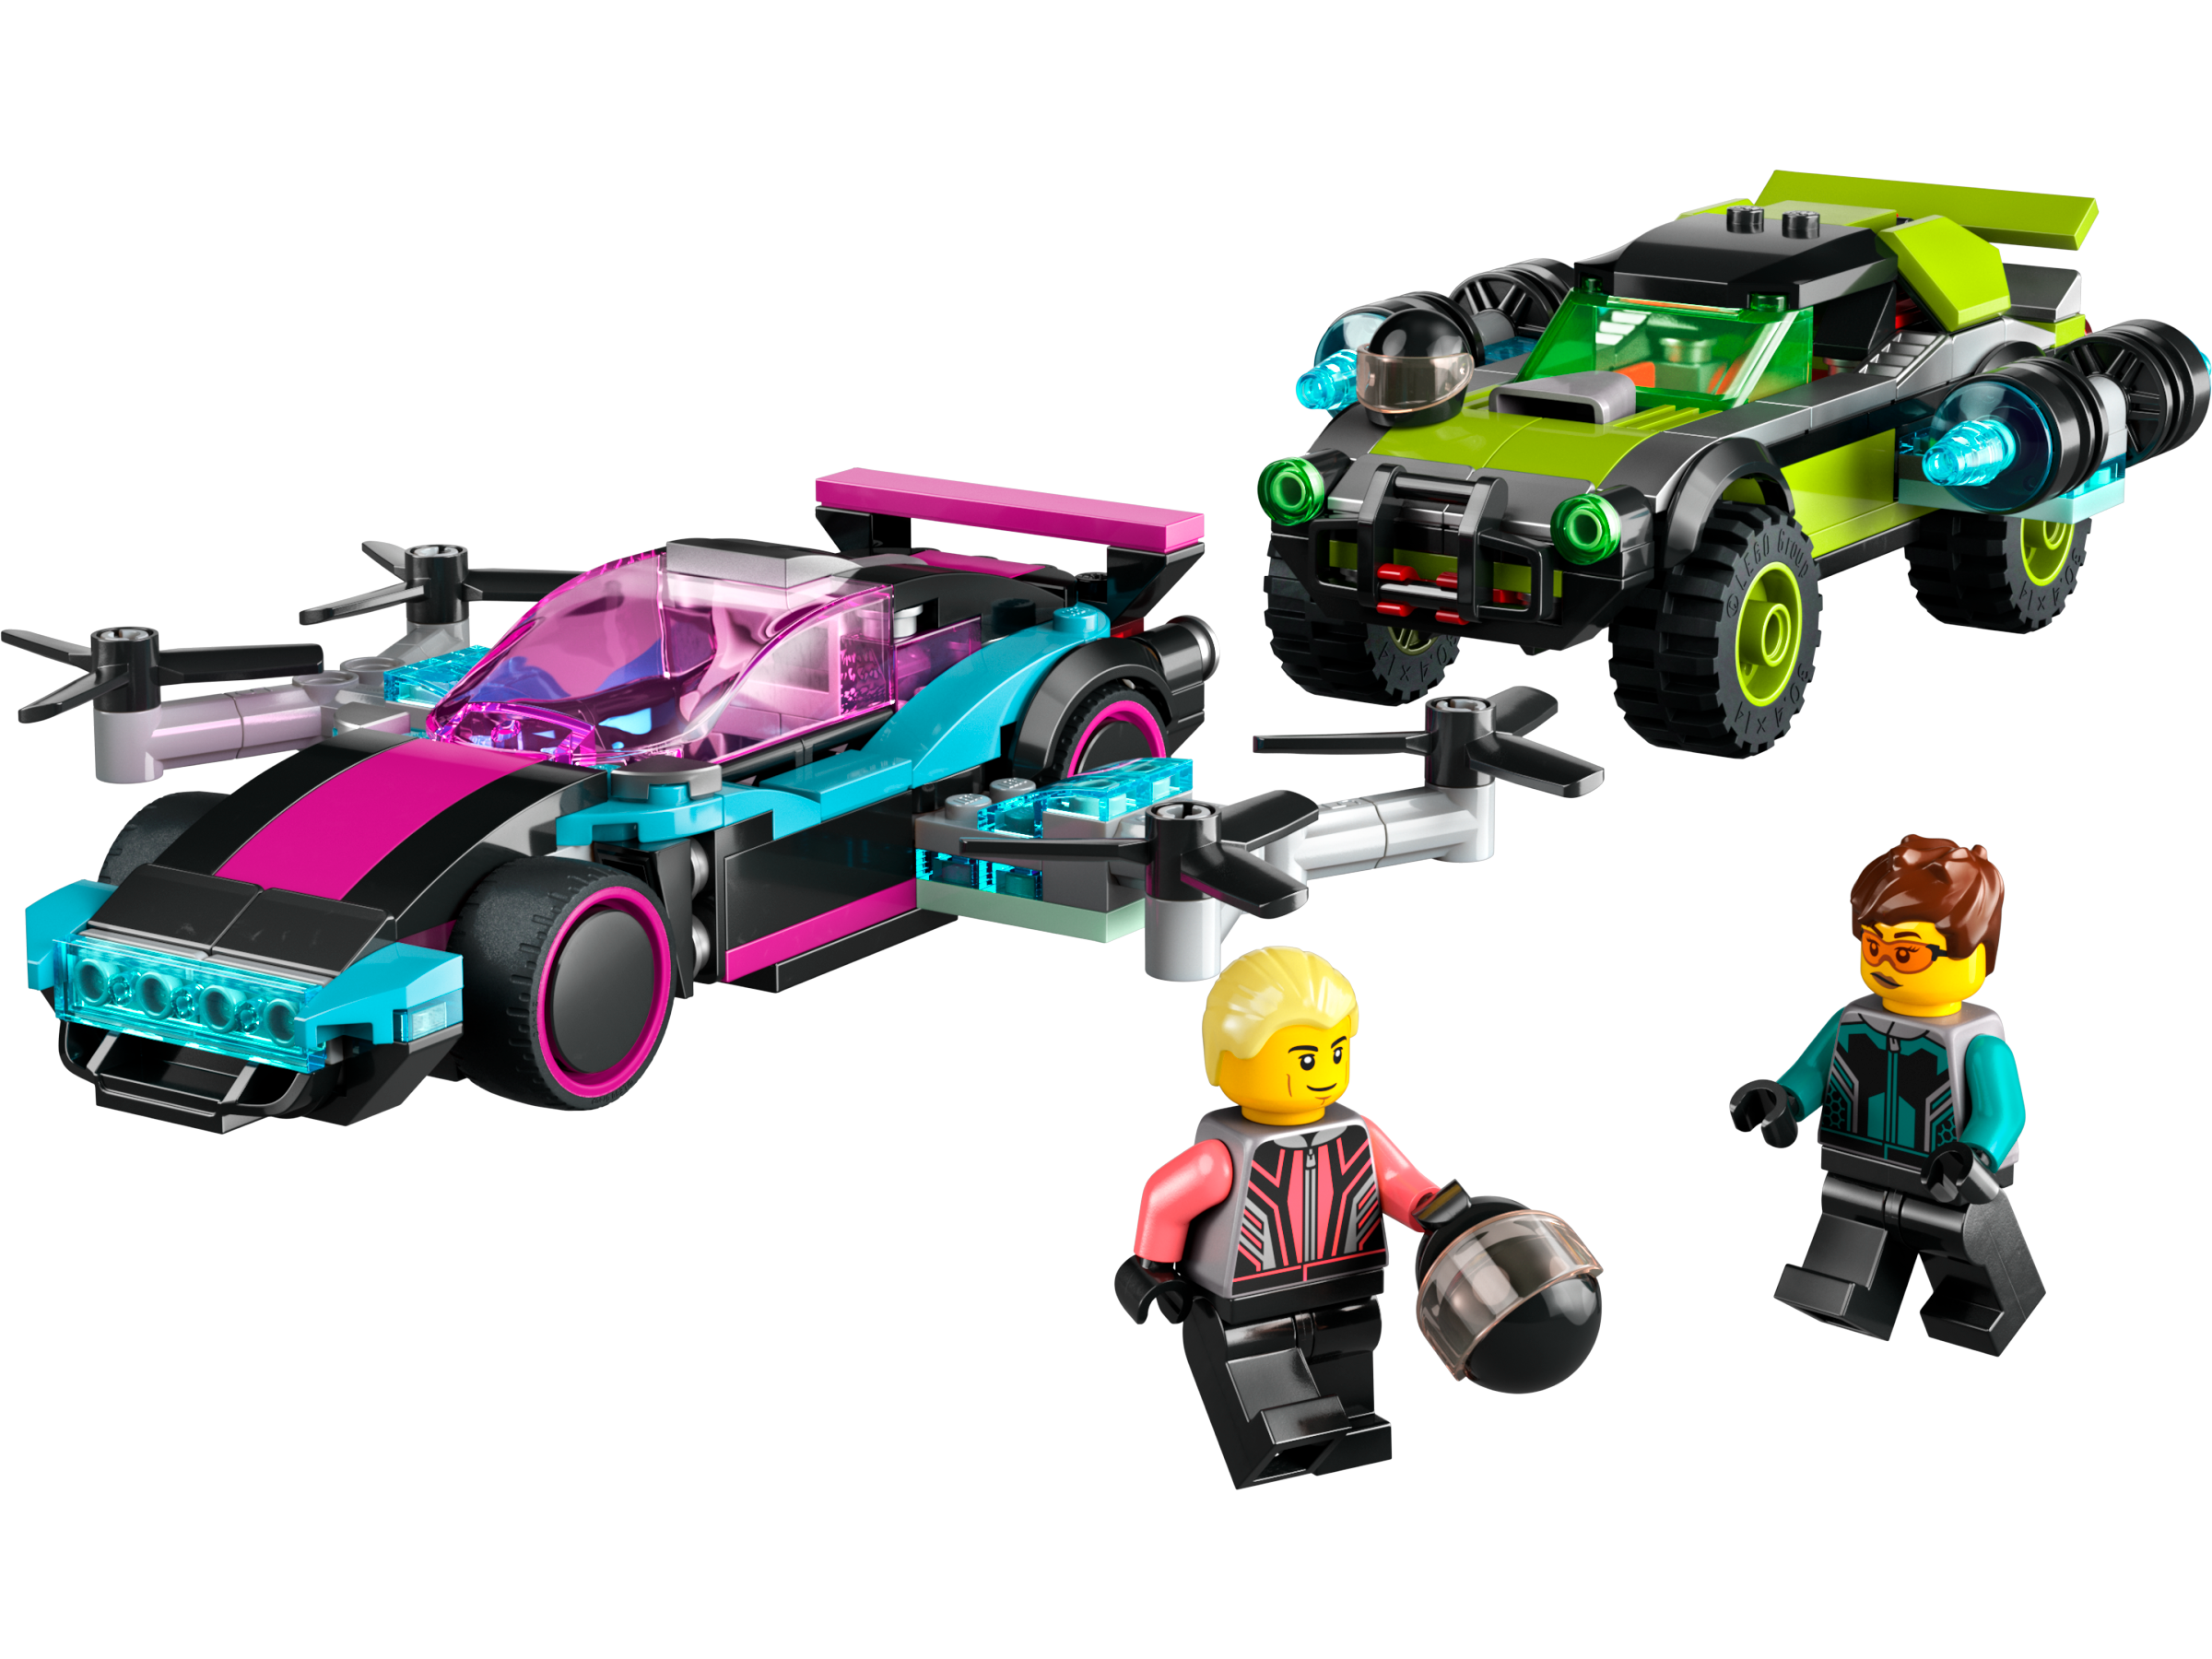 Modified Race Cars 60396 | City | Buy online at the Official LEGO® Shop US